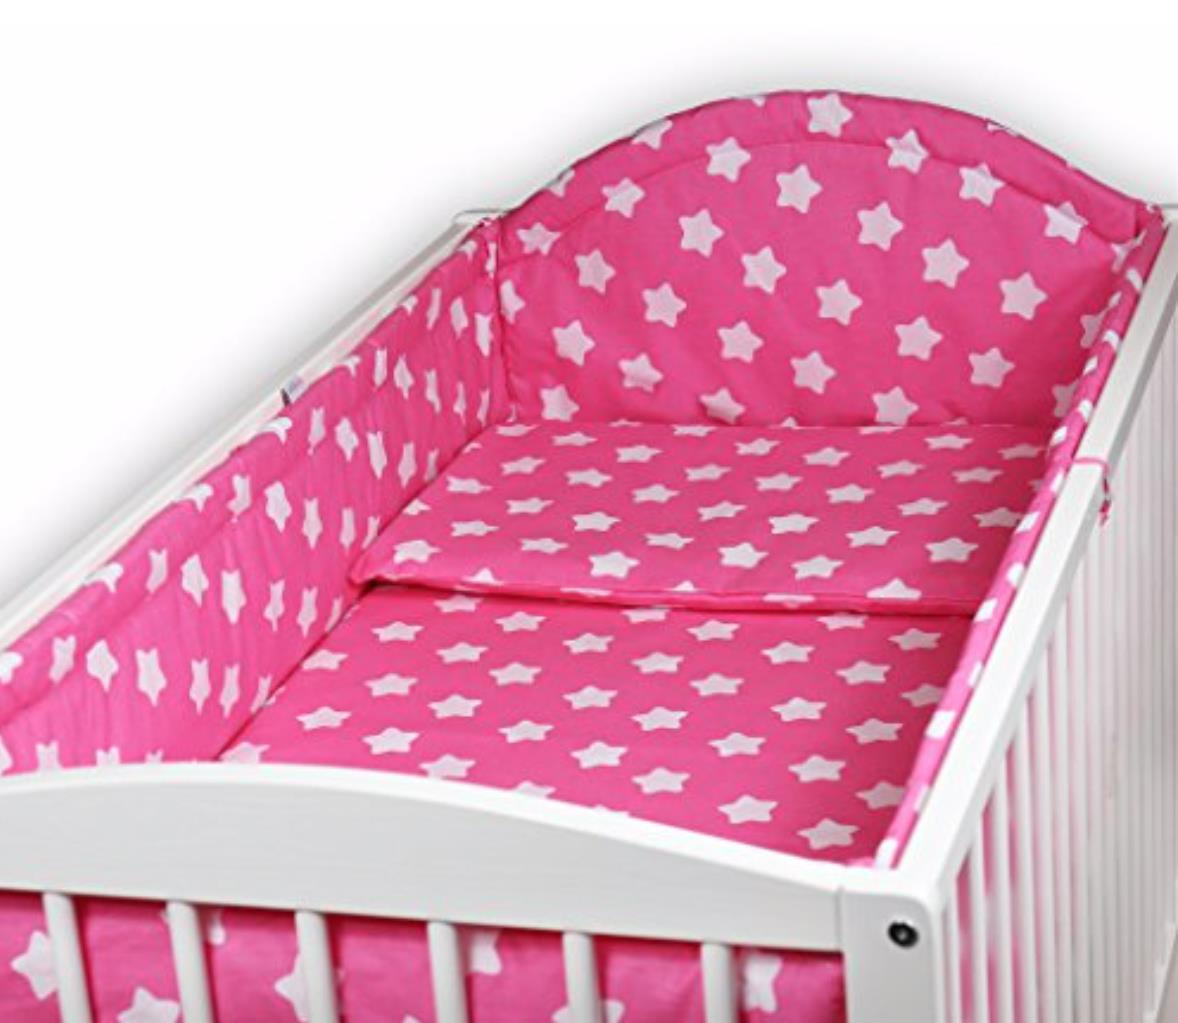 Padded Bumper To Fit Baby Cot Bed All-Round Cotton 420cm Big White Stars On Pink